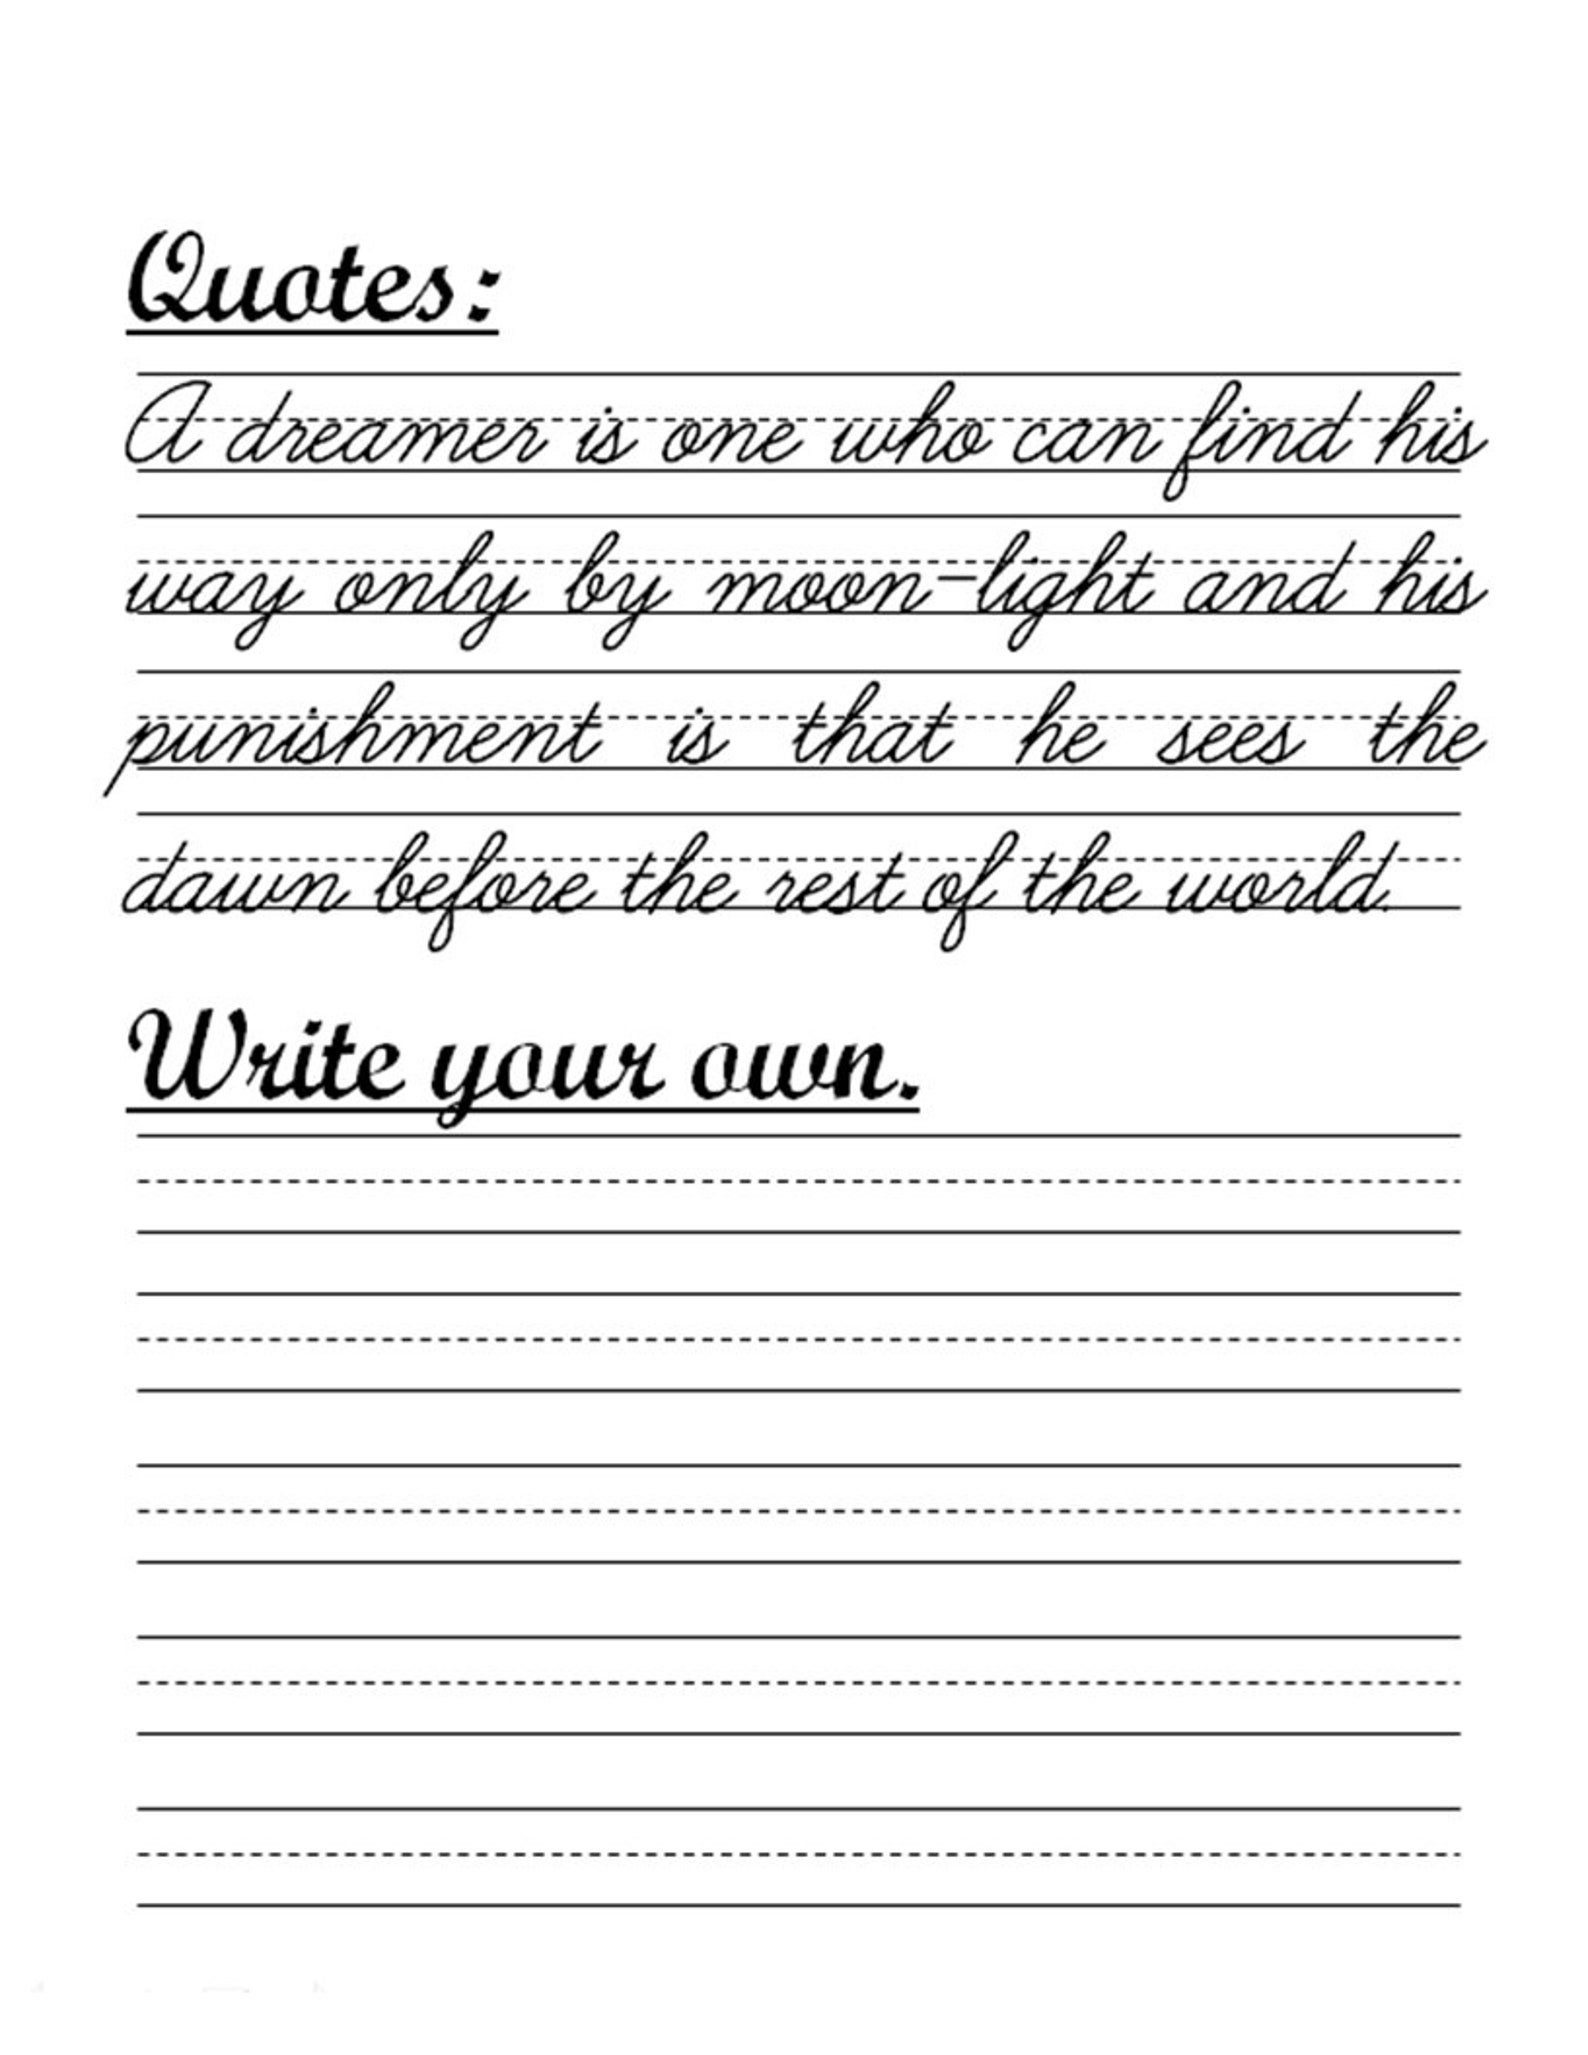 Cursive Handwriting Practice for Teens: Learning Cursive With ...